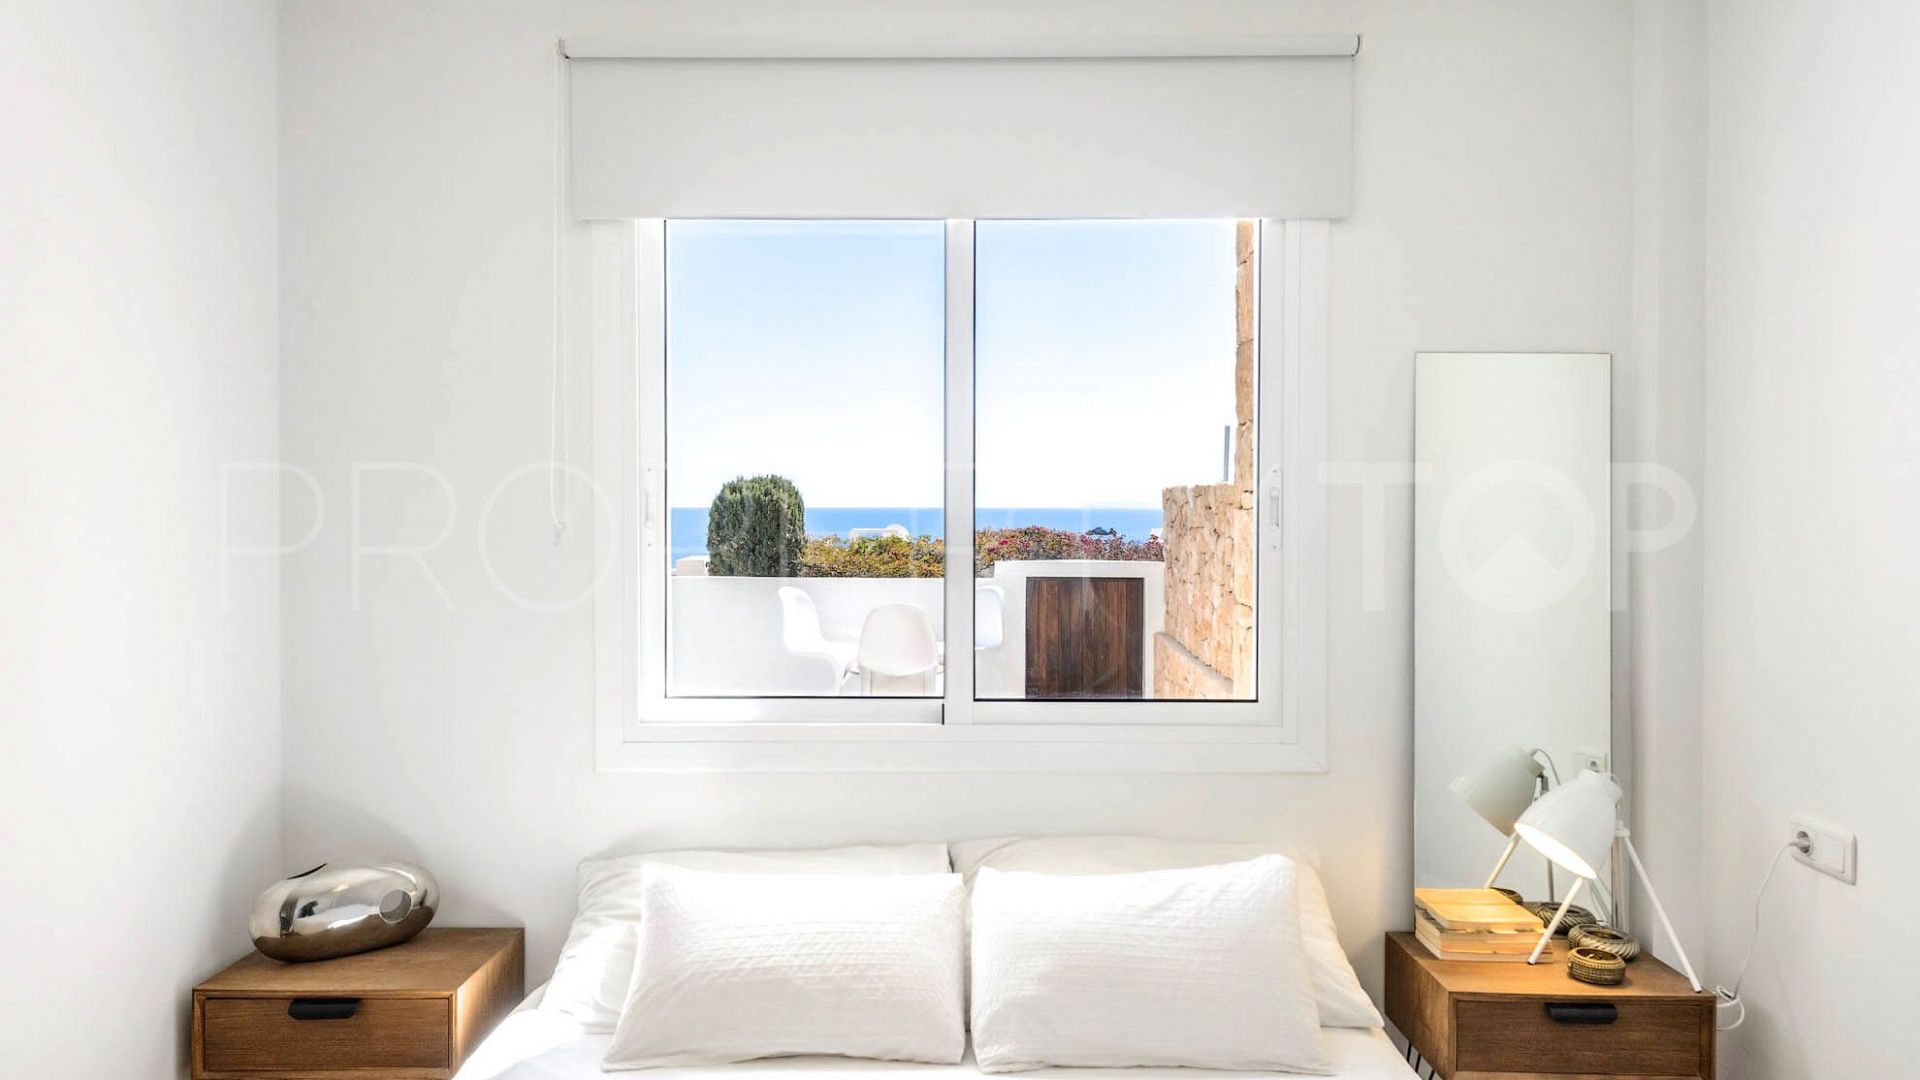 For sale Roca Llisa apartment with 2 bedrooms